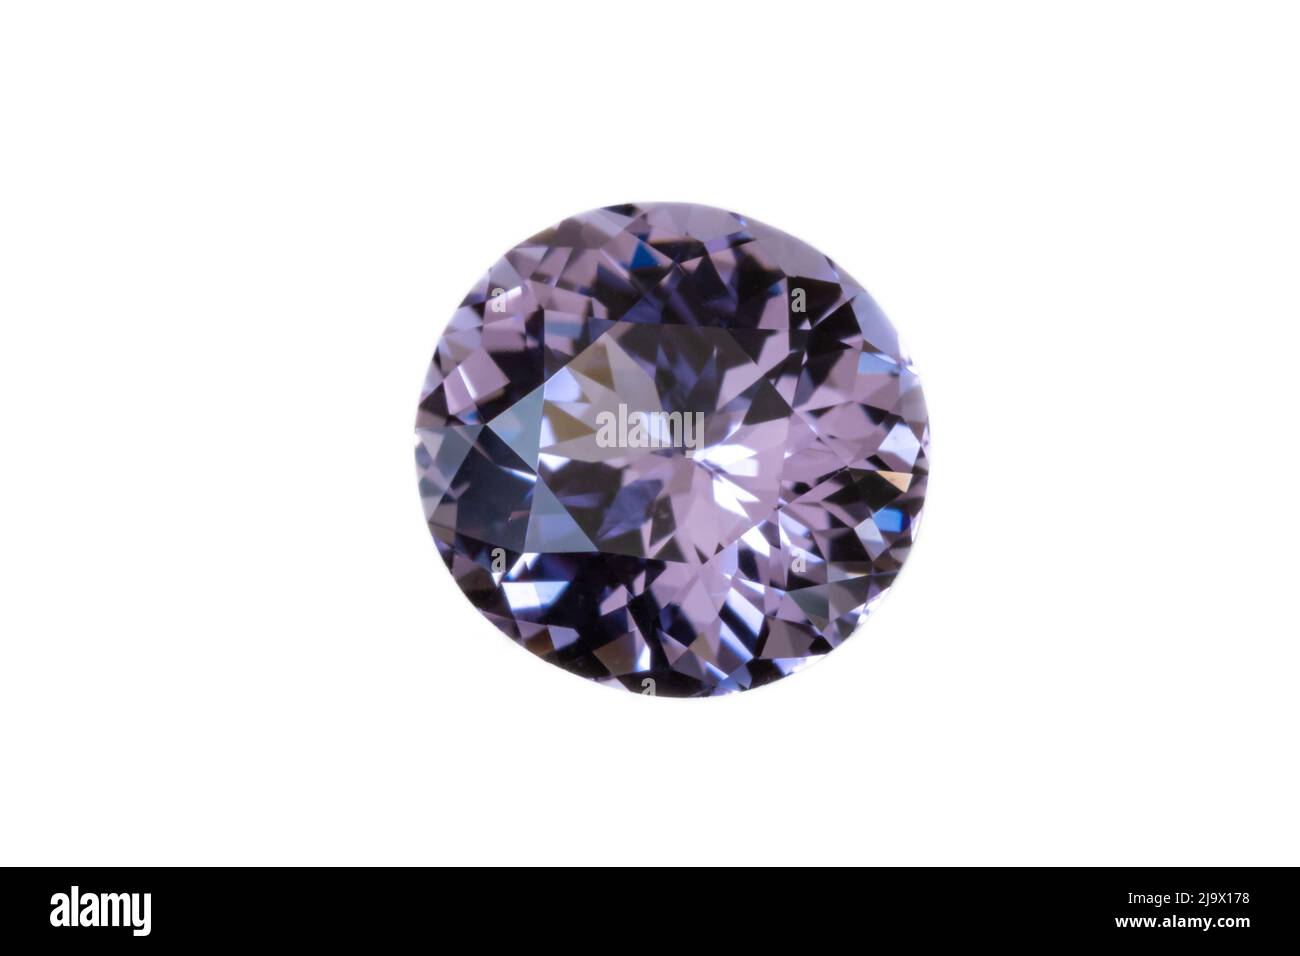 Faceted Lilac-colored Spinel gemstone from Sri Lanka. Silight Oval/near round, 7x7.6mm. Weight 1.64 carats. Photographed with white background. Stock Photo